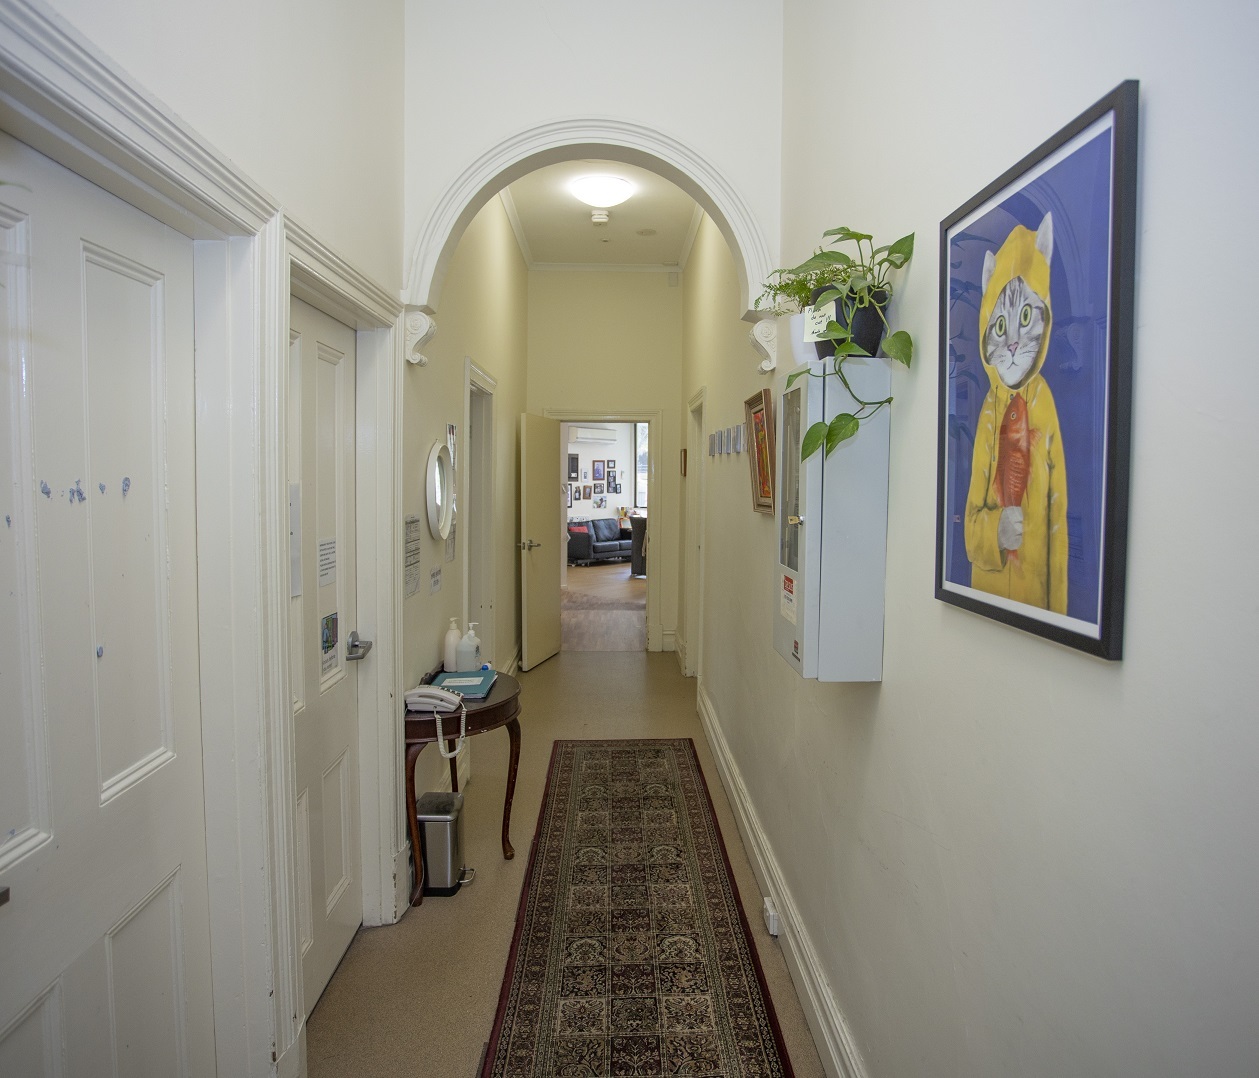 Hallway with wall art and ceiling light